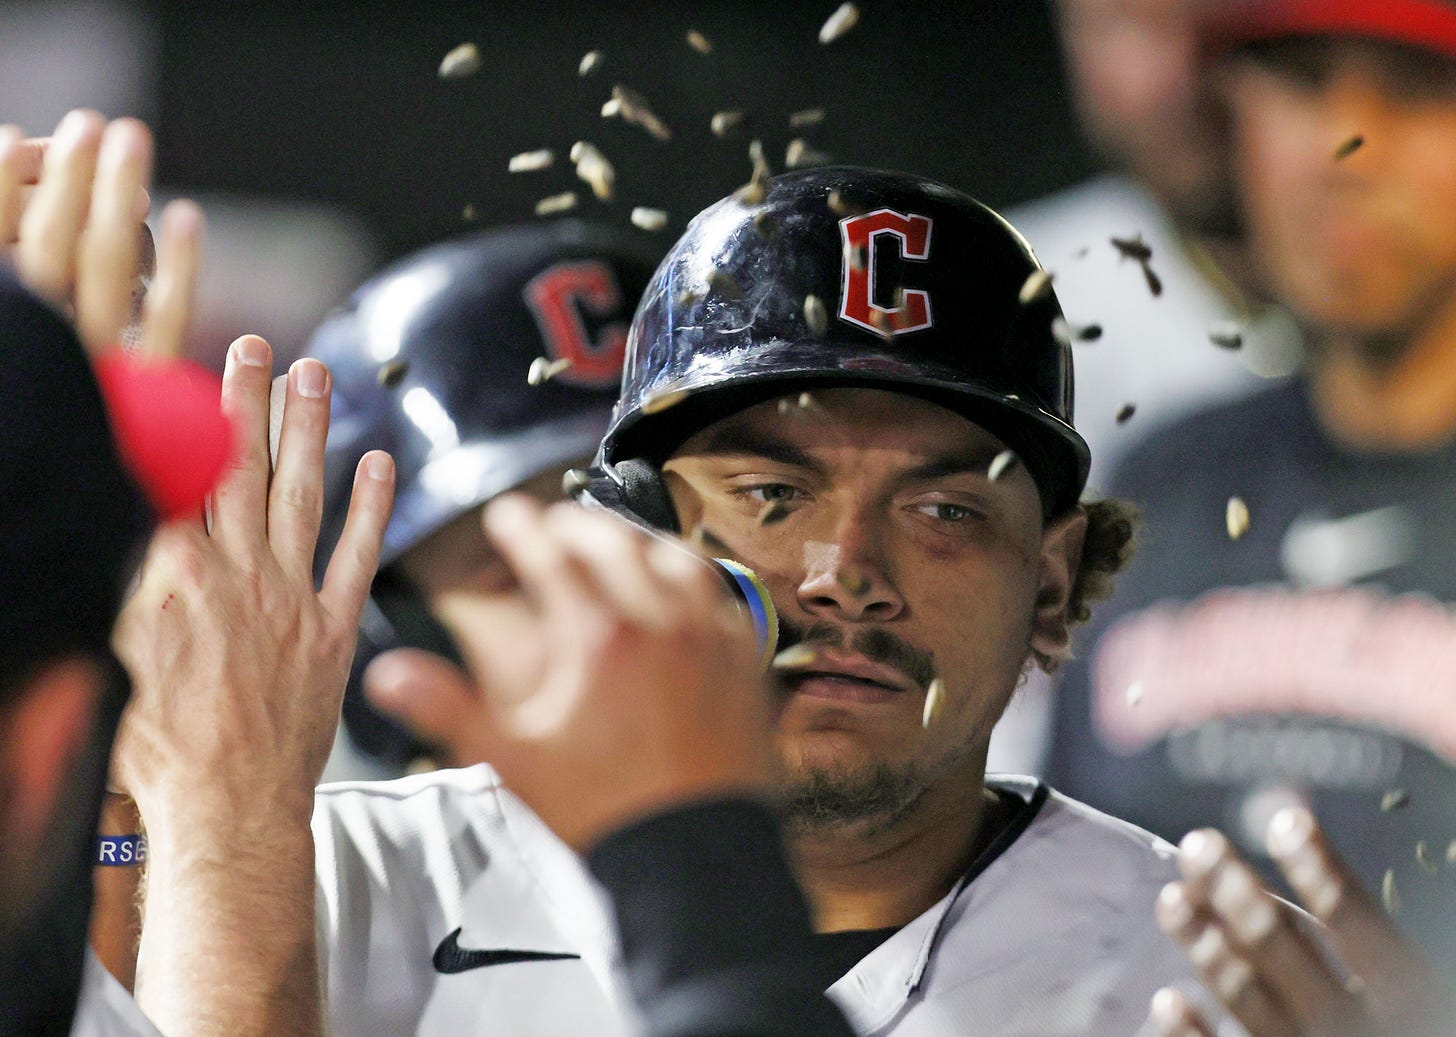 Cleveland Guardians first baseman Josh Naylor is showered with sunfire seeds by teammates in the dugout after hitting a home run in the eighth inning, May 12, 2023, at Progressive Field.